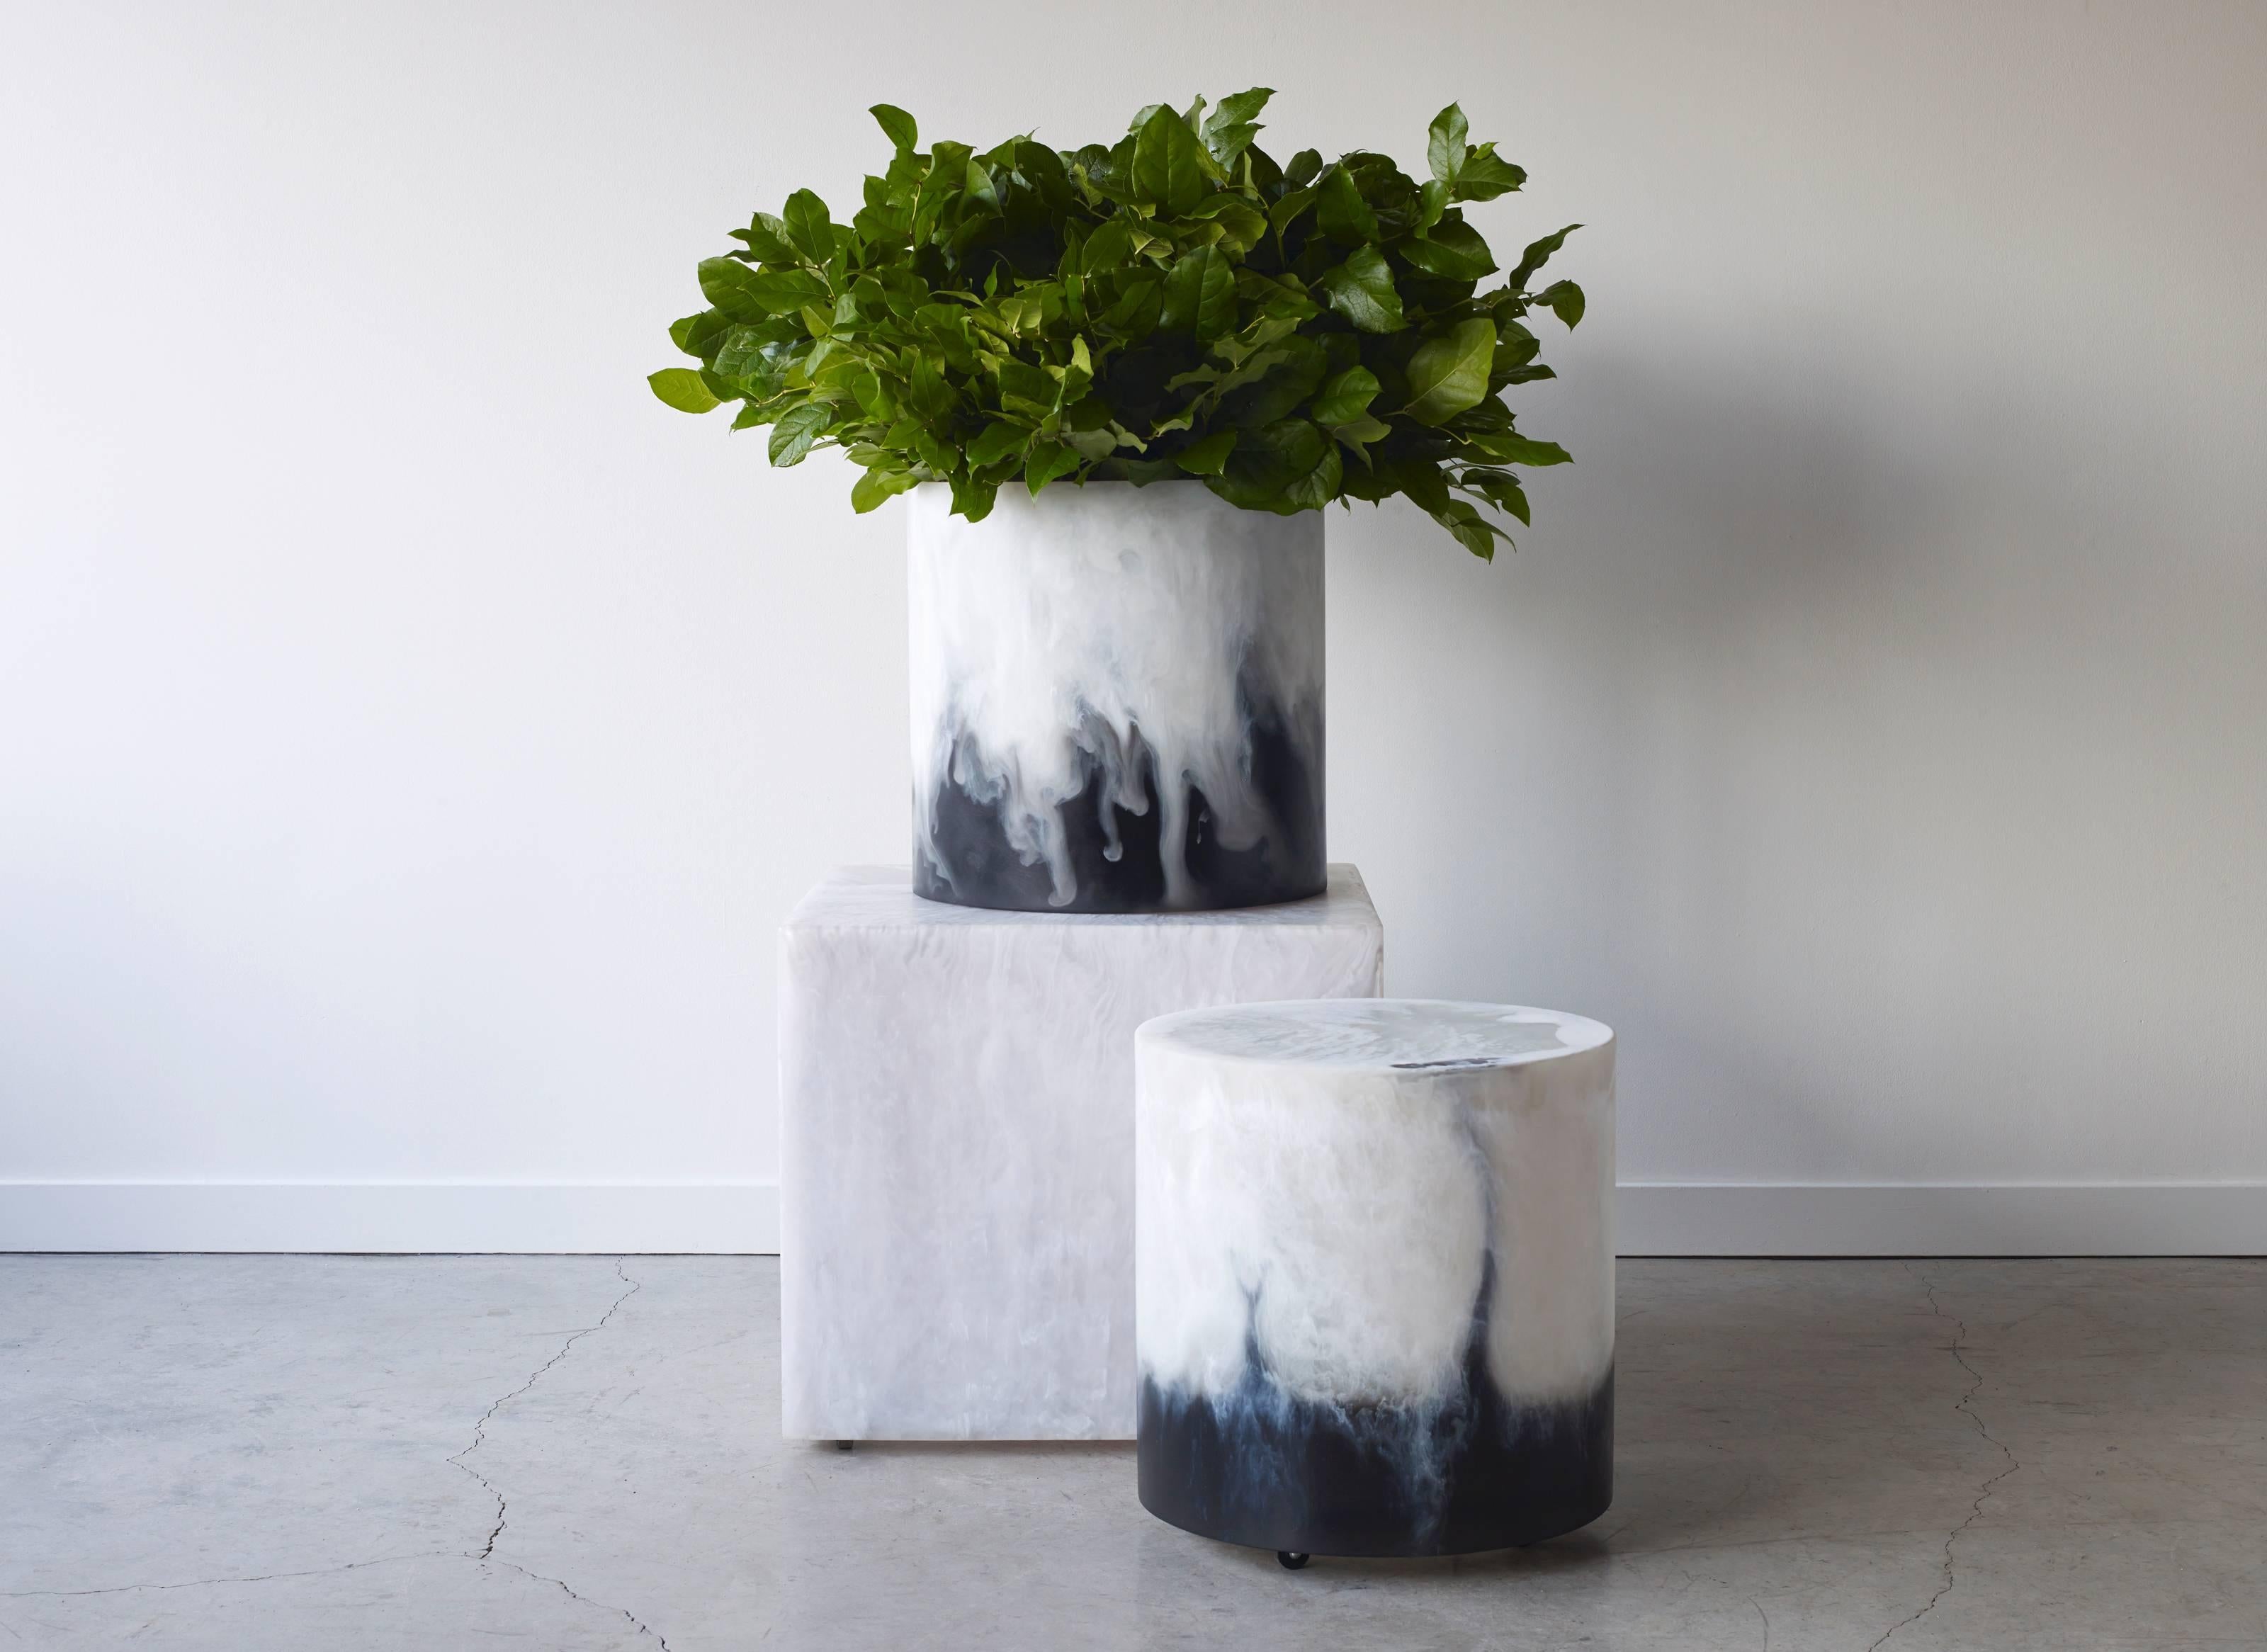 Uncomplicated, sculpture are versatile enough to complement any space. Mounted on casters, they tuck neatly under table and double as casual seating Martha Sturdy's resin table can be poured in over 40 different colors or combination of making the